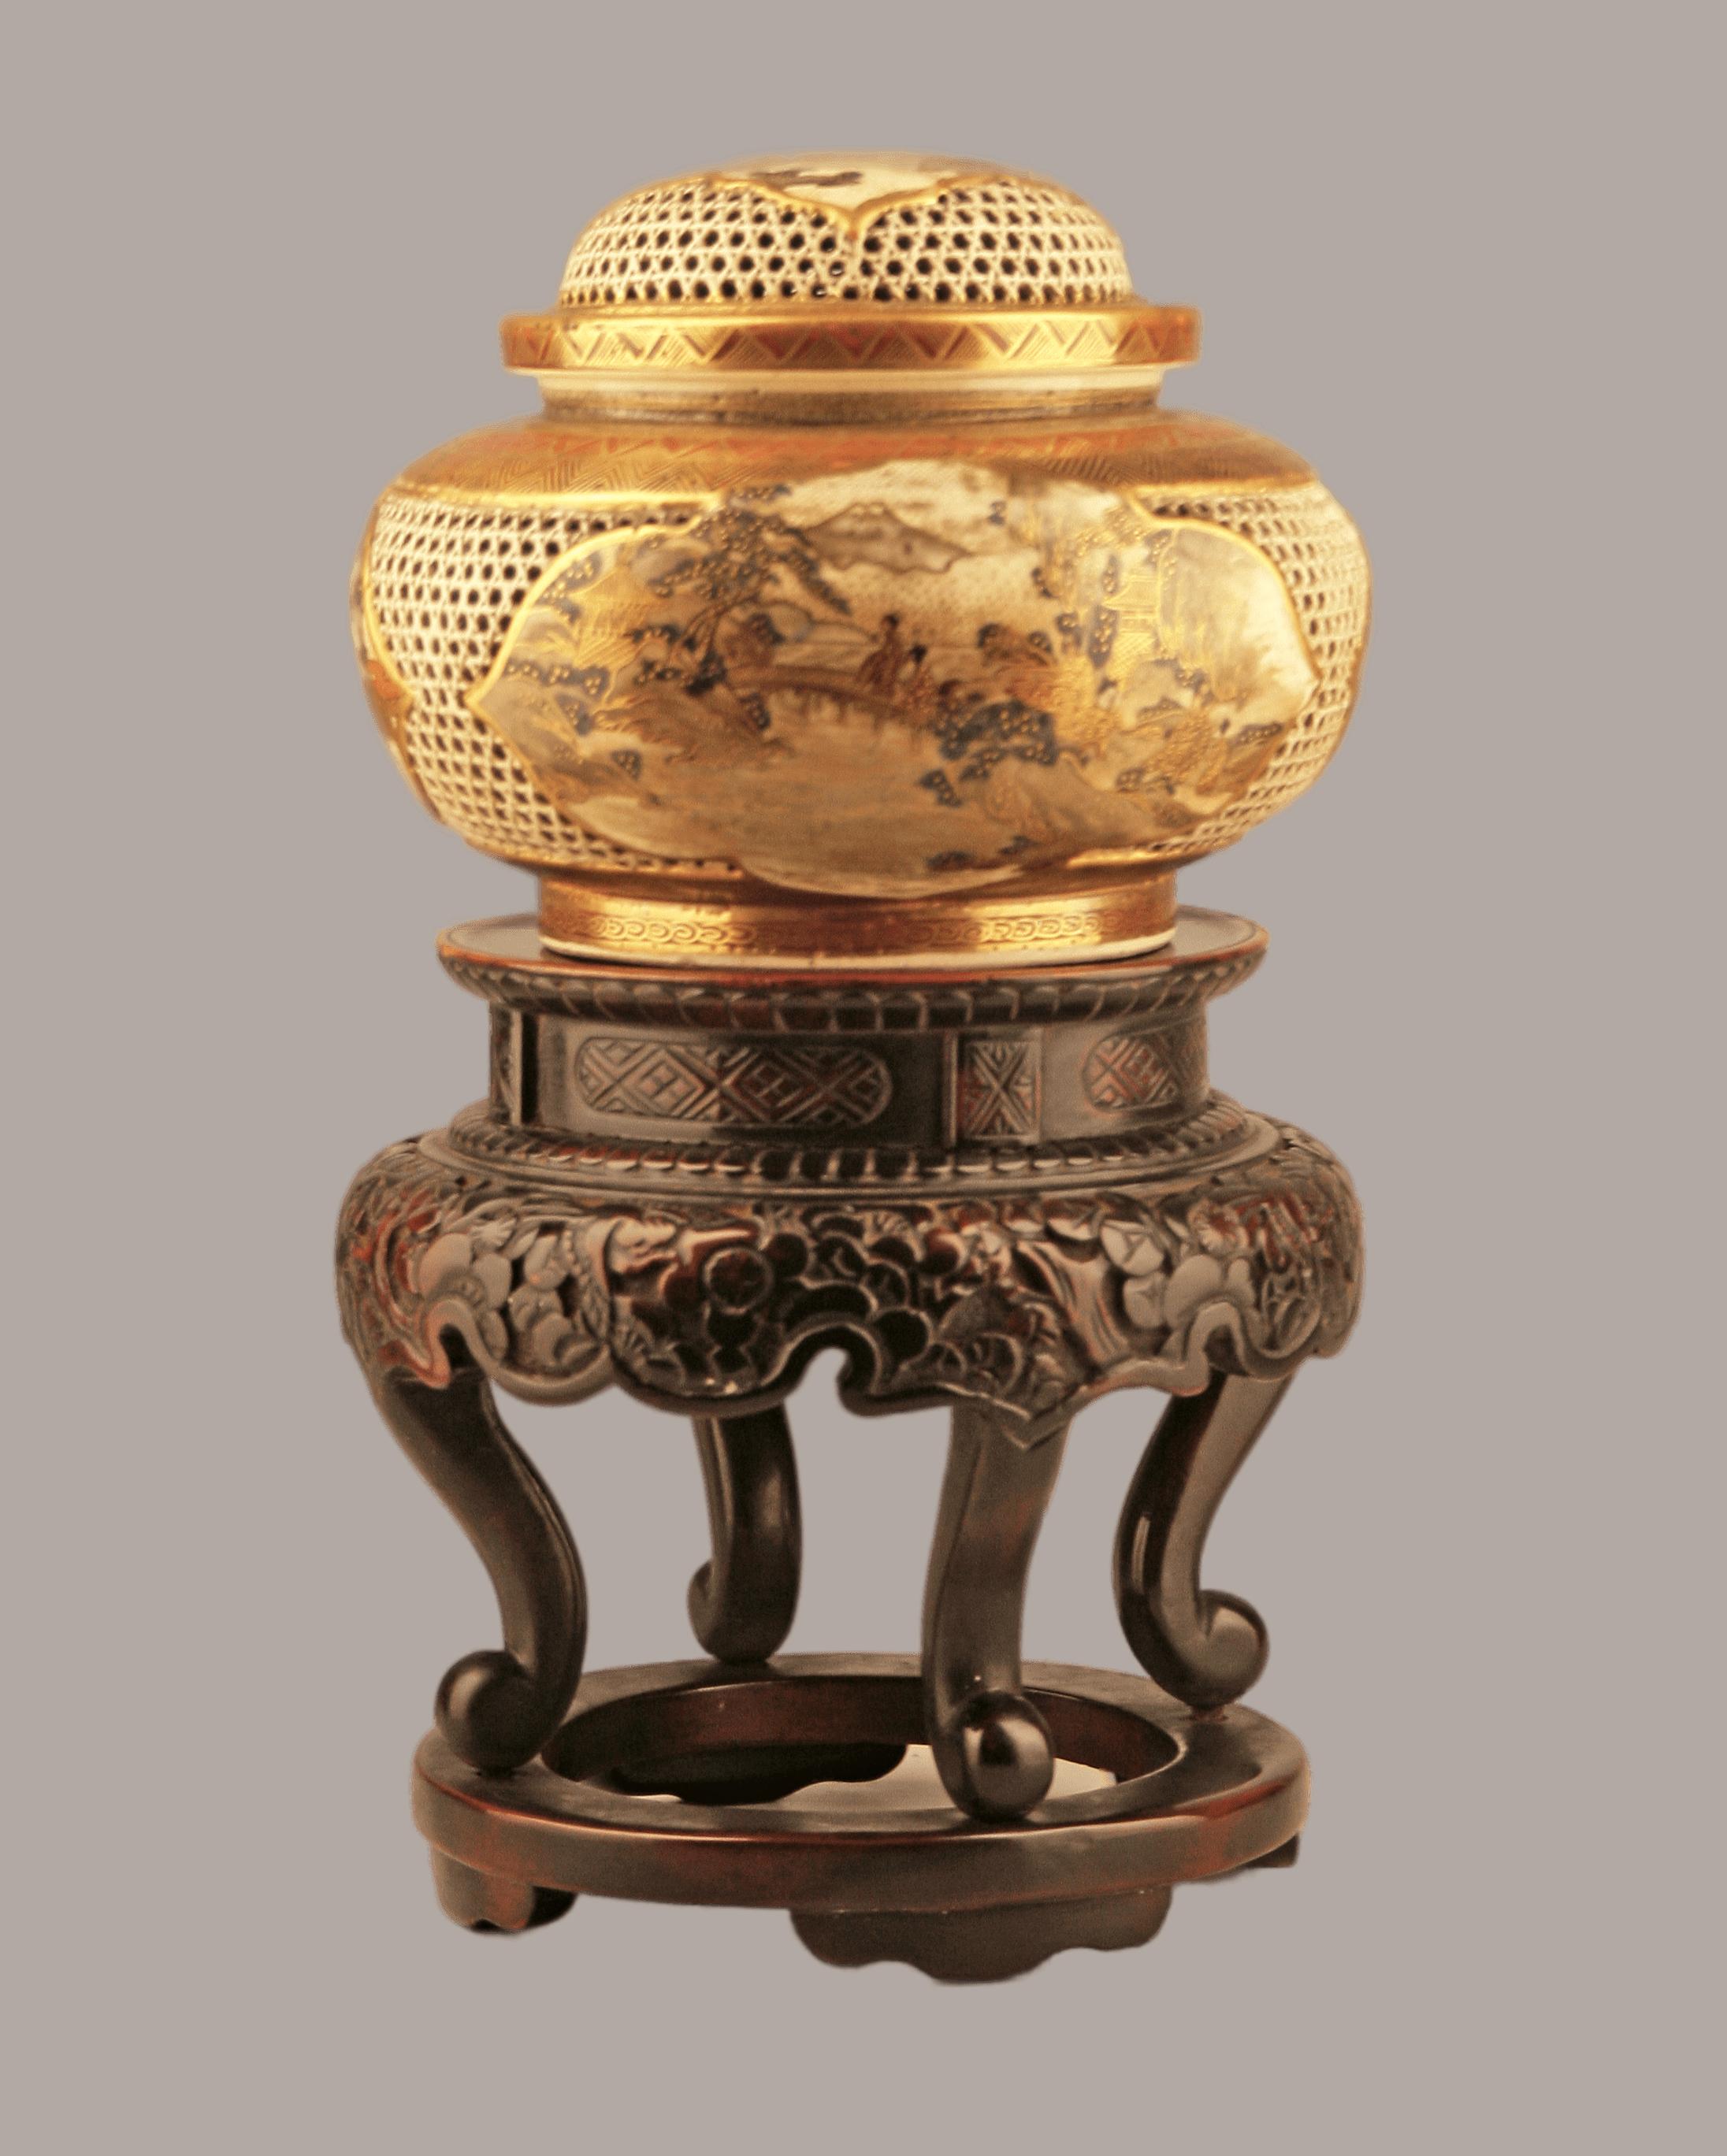 Japanese 19th century Edo-Meiji Period Satsuma stoneware incense burner (Koro) with small wooden support table

By: unknown
Material: ceramic, stoneware, wood, enamel, paint
Technique: carved, hand-carved, hand-painted, painted, varnished, enameled,